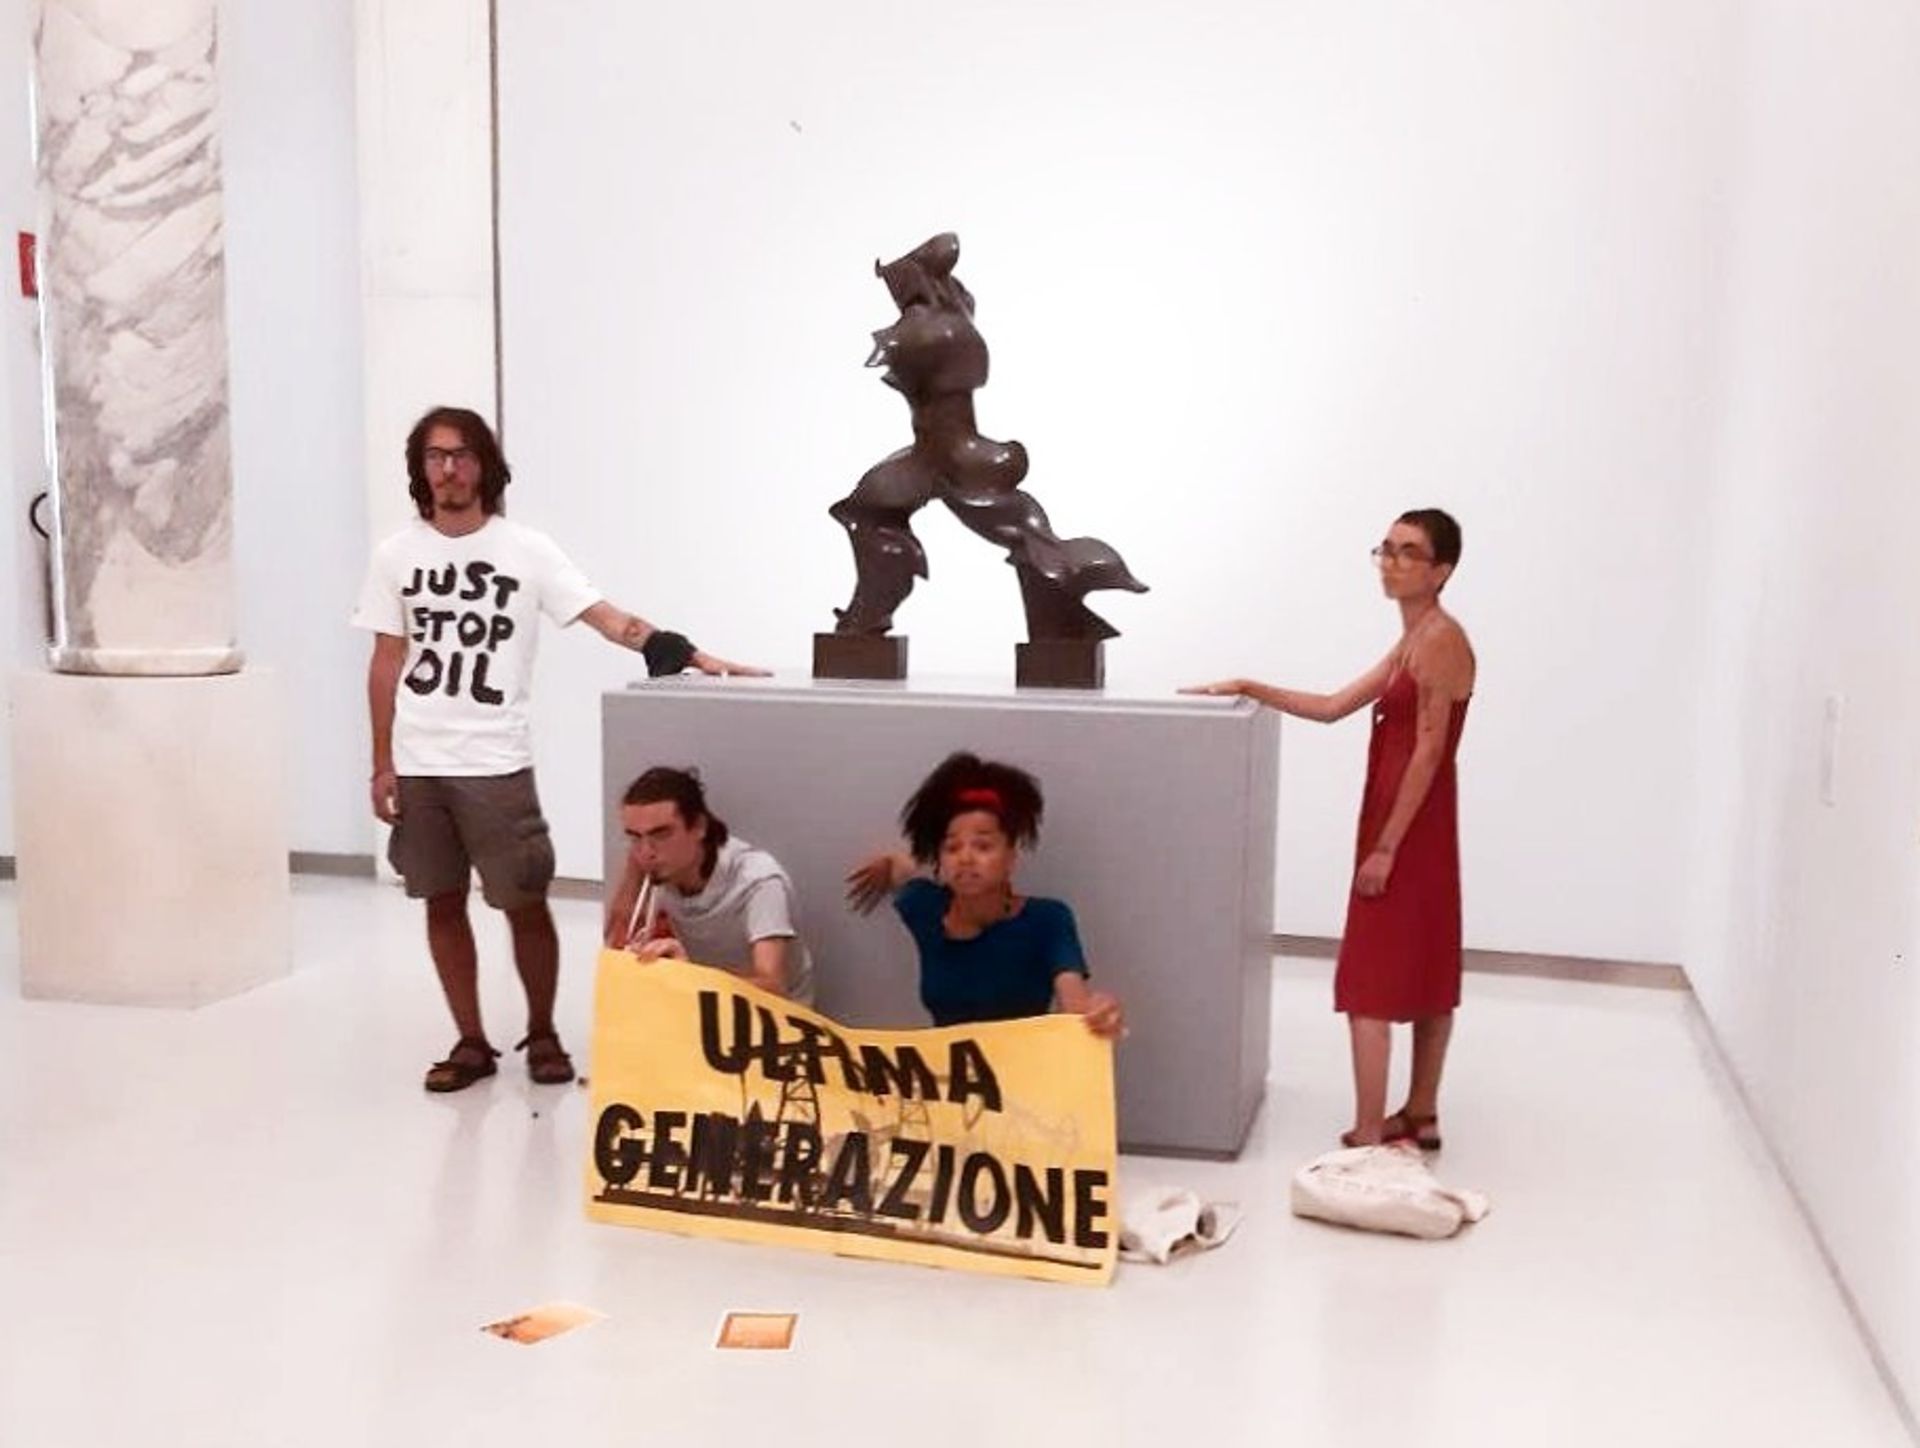 A week after their demonstration at Florence's Gallerie degli Uffizi, Ultima Generazione are back with a protest at the Museo del Novecento in Milan